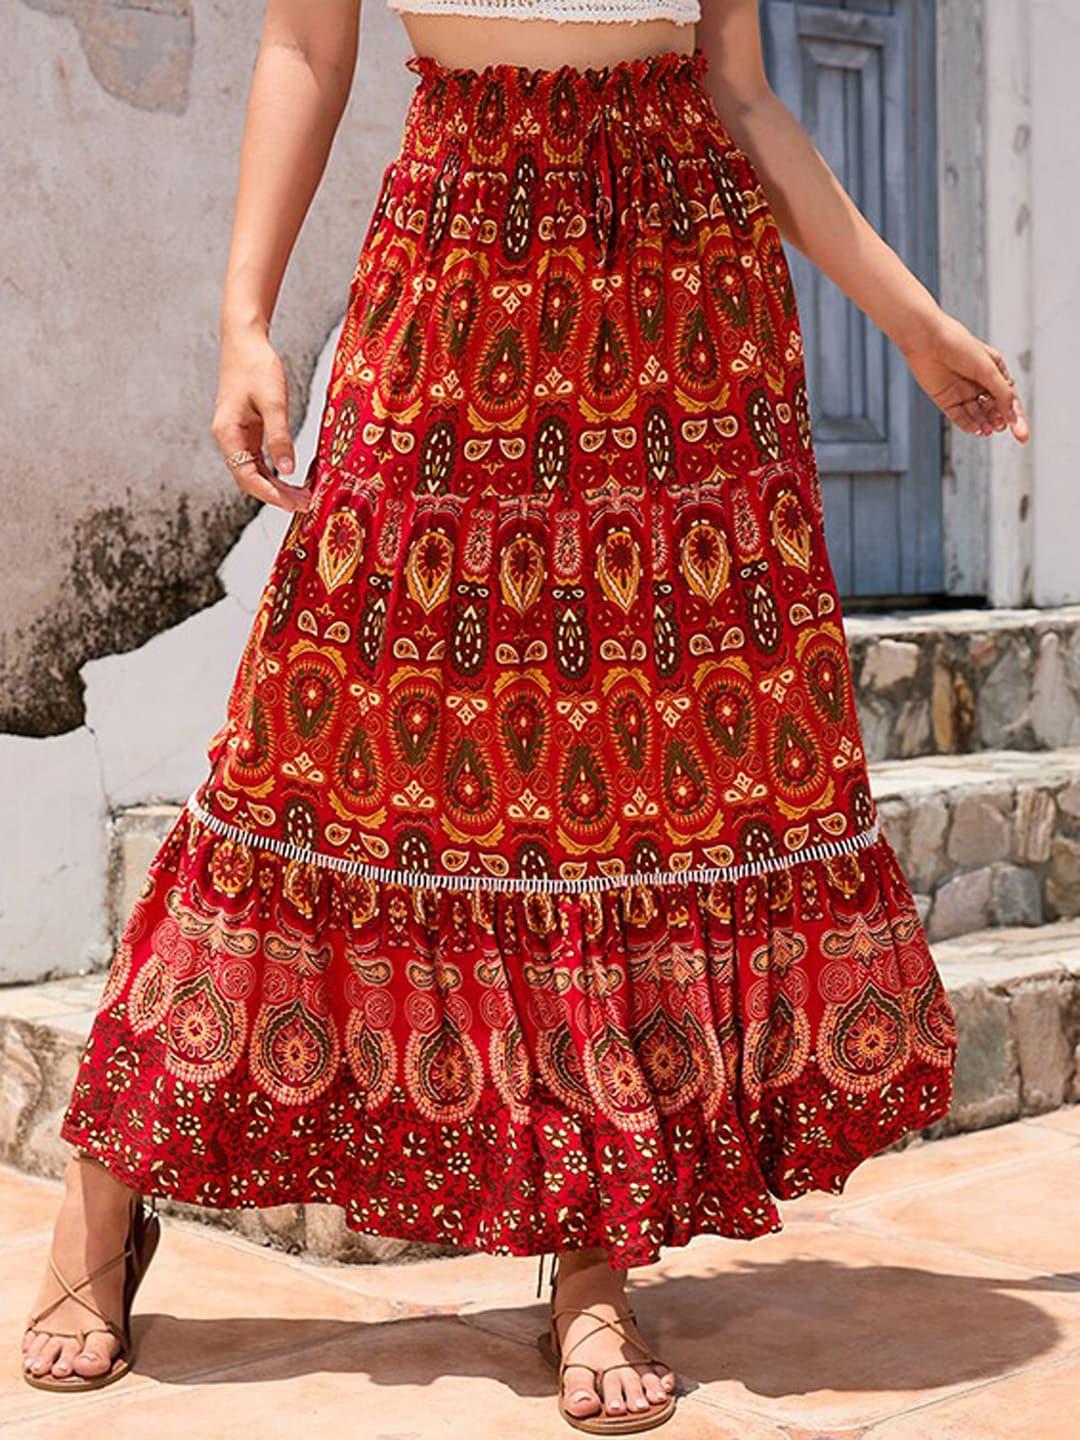 stylecast-red-ethnic-motifs-printed-flared-maxi-skirt